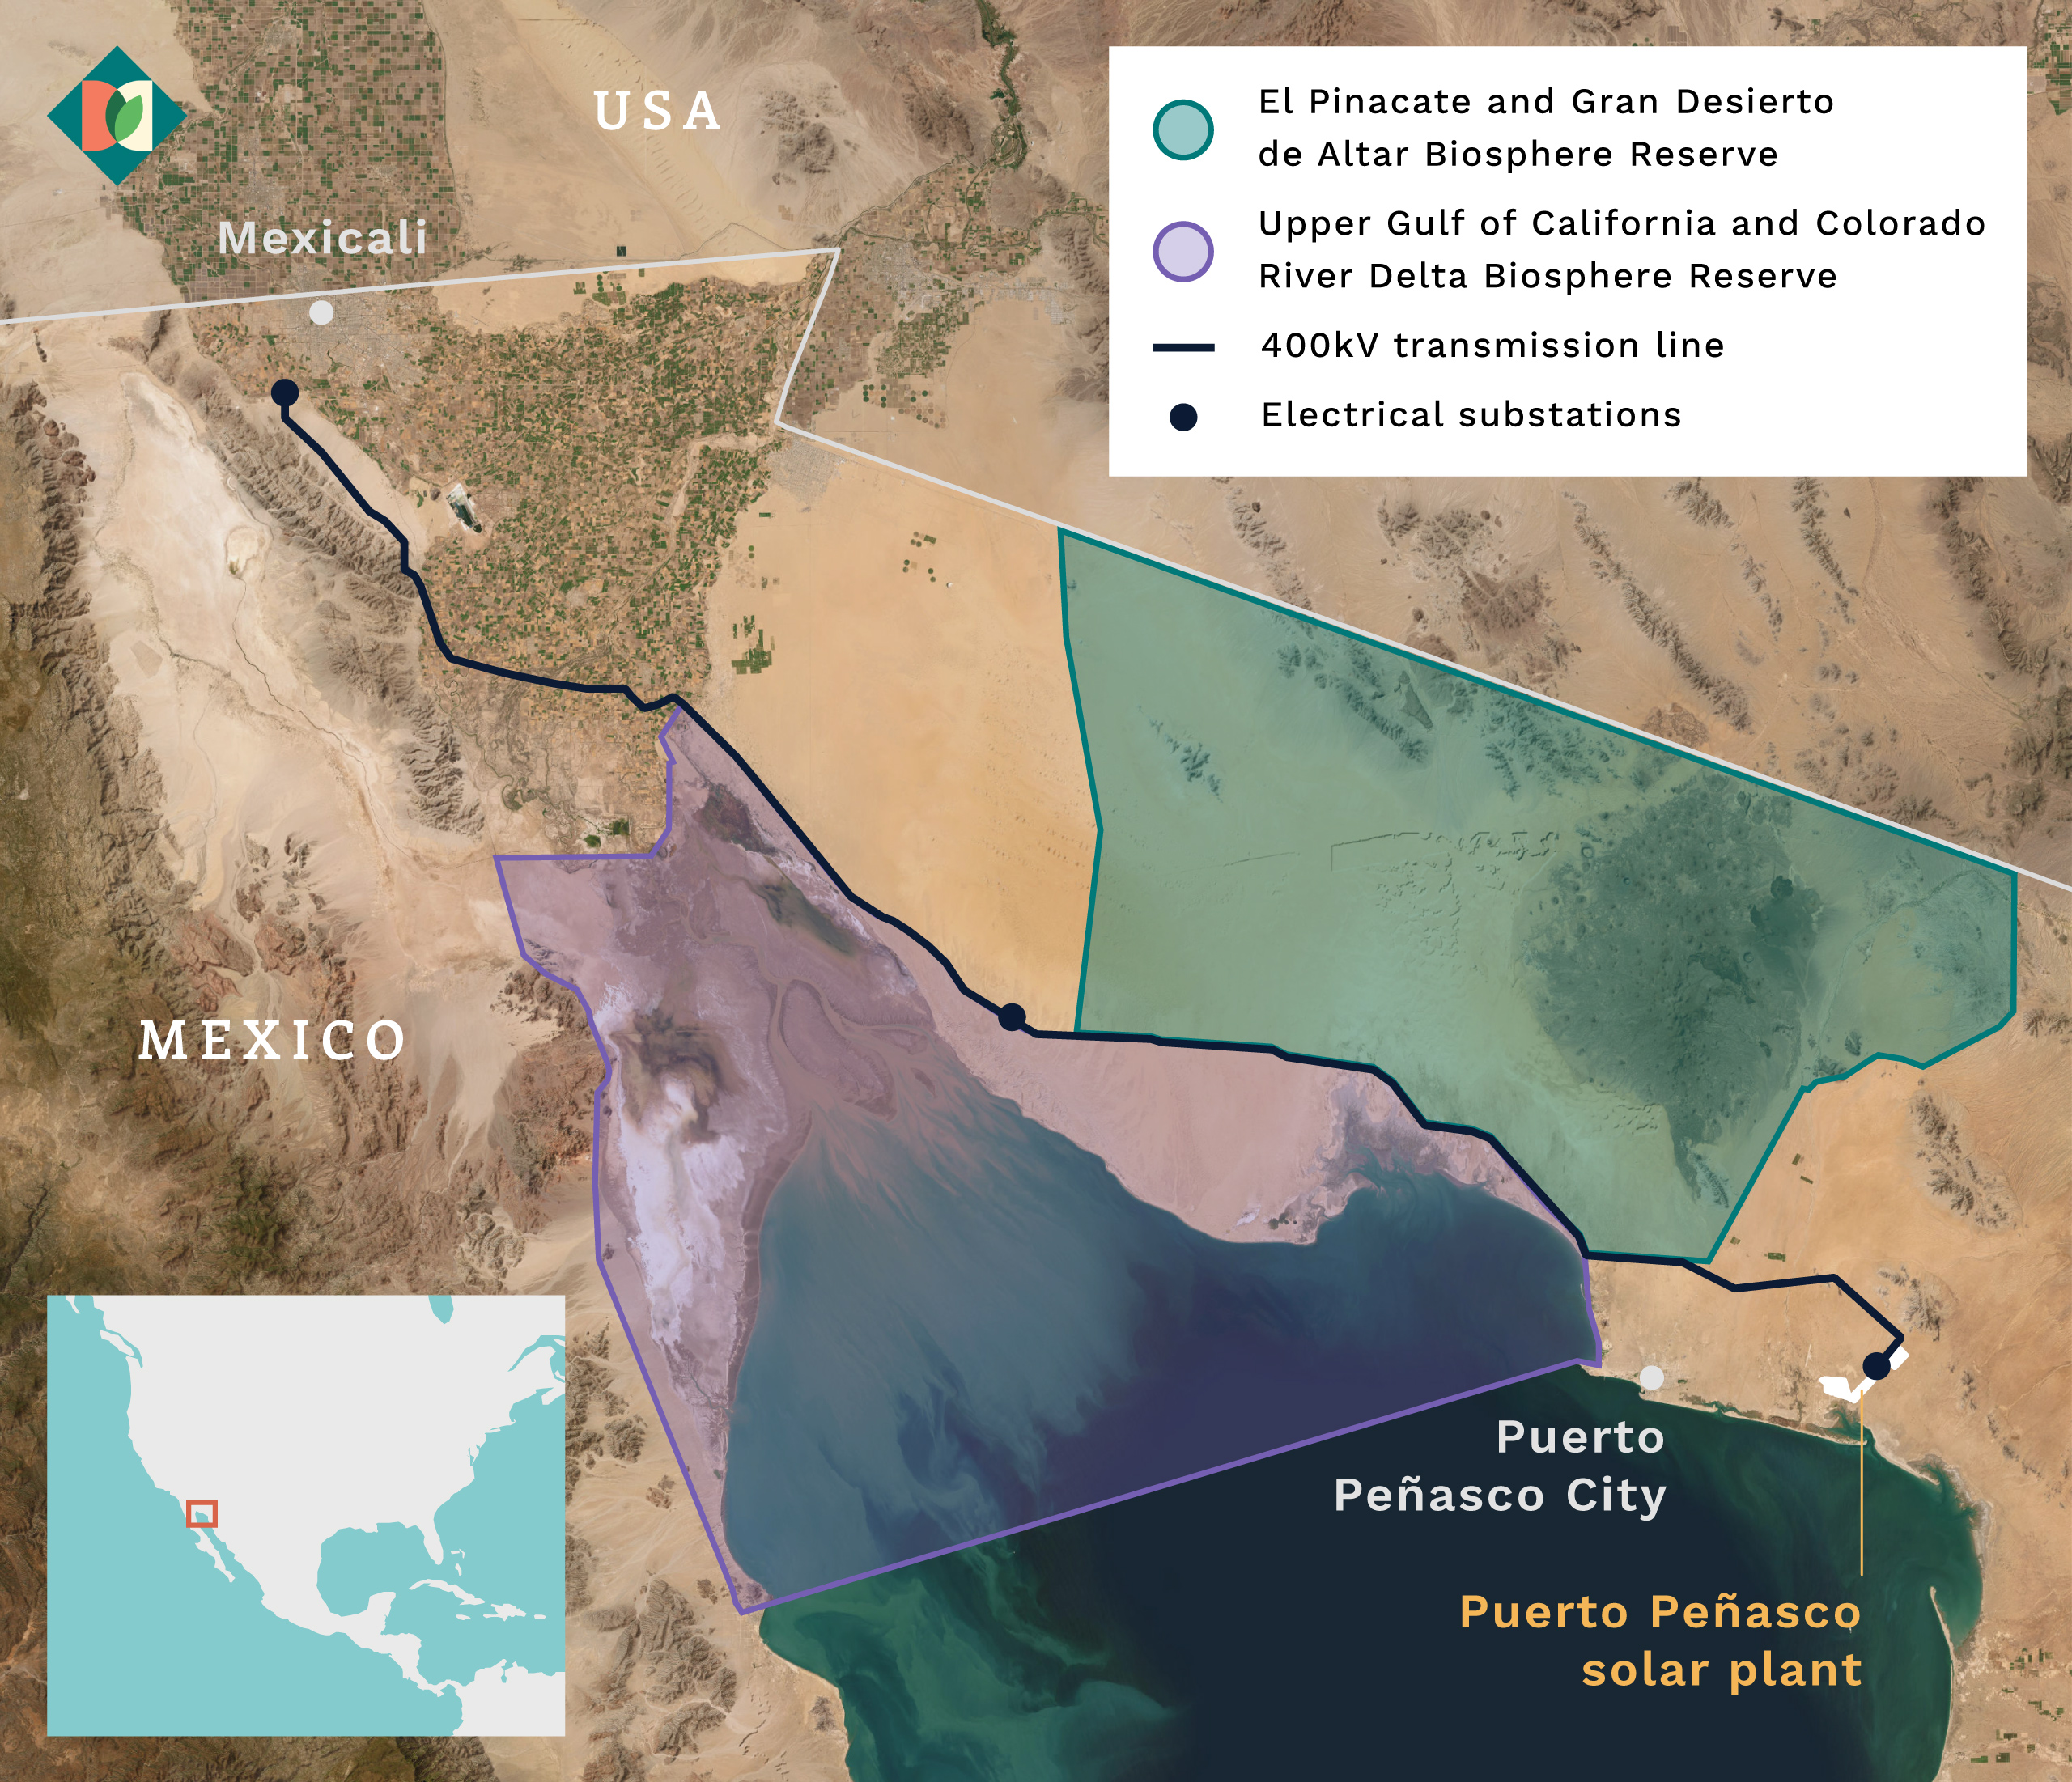 Map showing biosphere reserves in the Mexican state of Sonora, and planned transmission lines from the Puerto Peñasco solar power plant